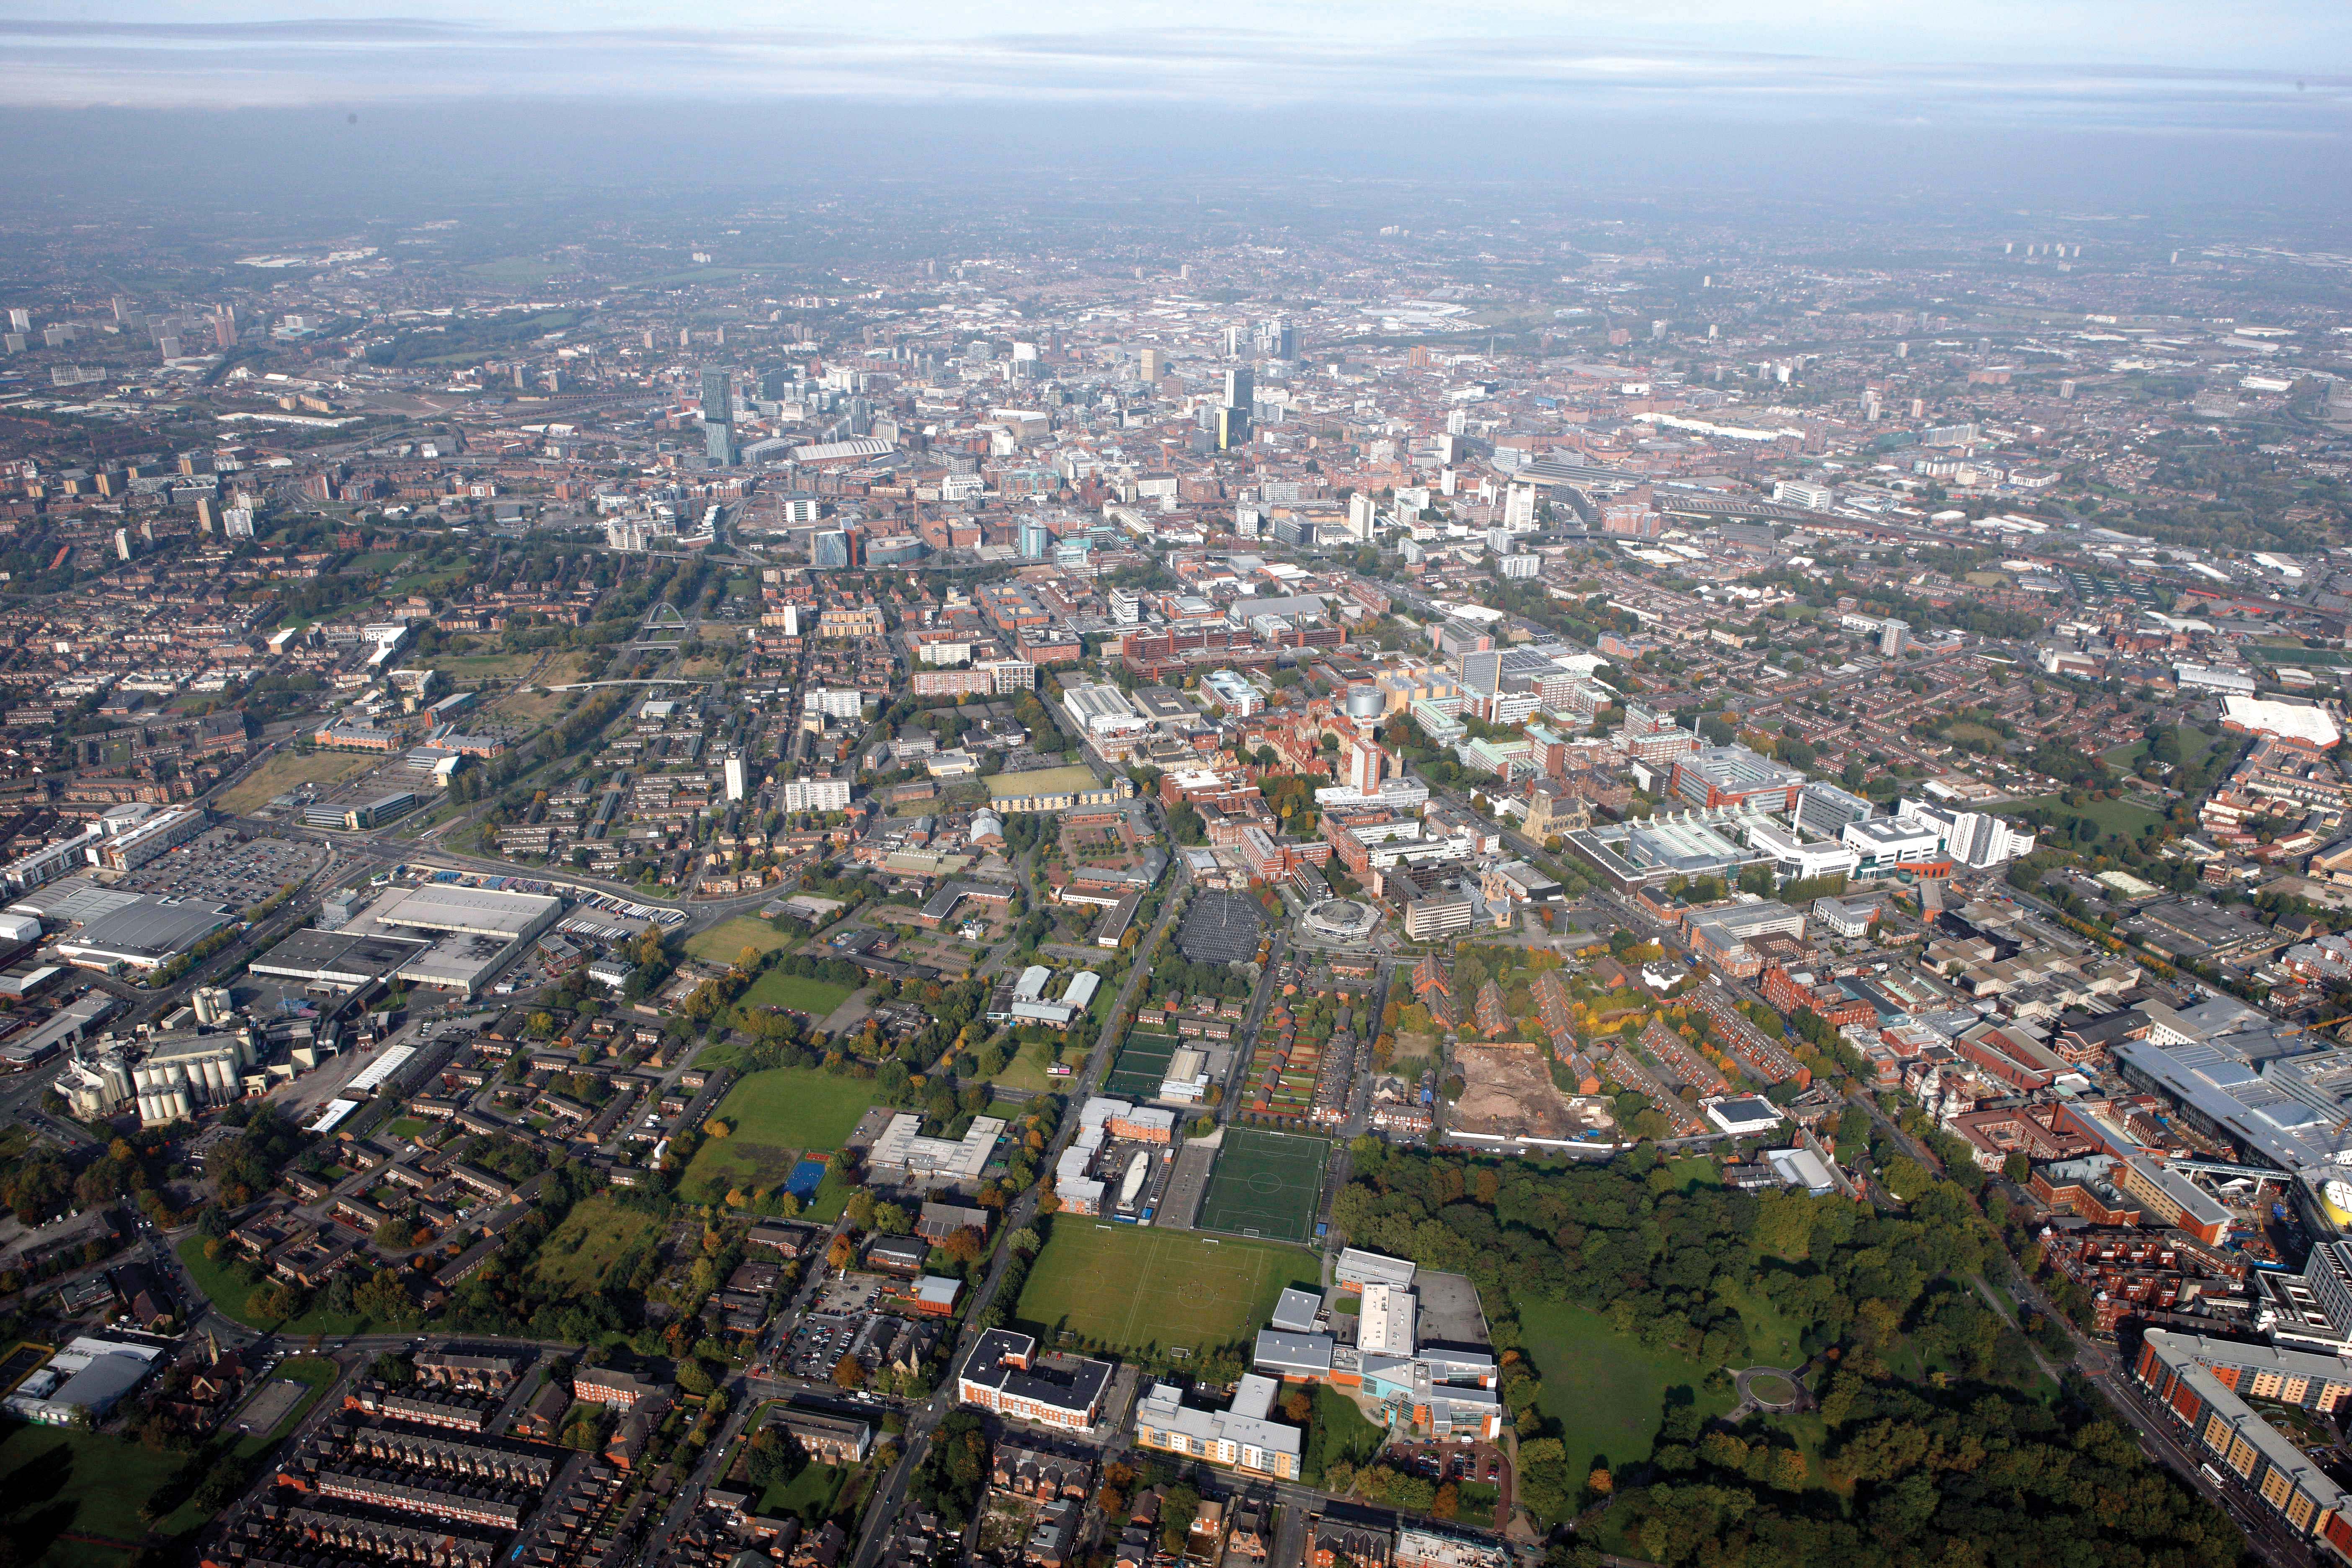 Manchester from above - photo from Daniel Nisbit via Flickr